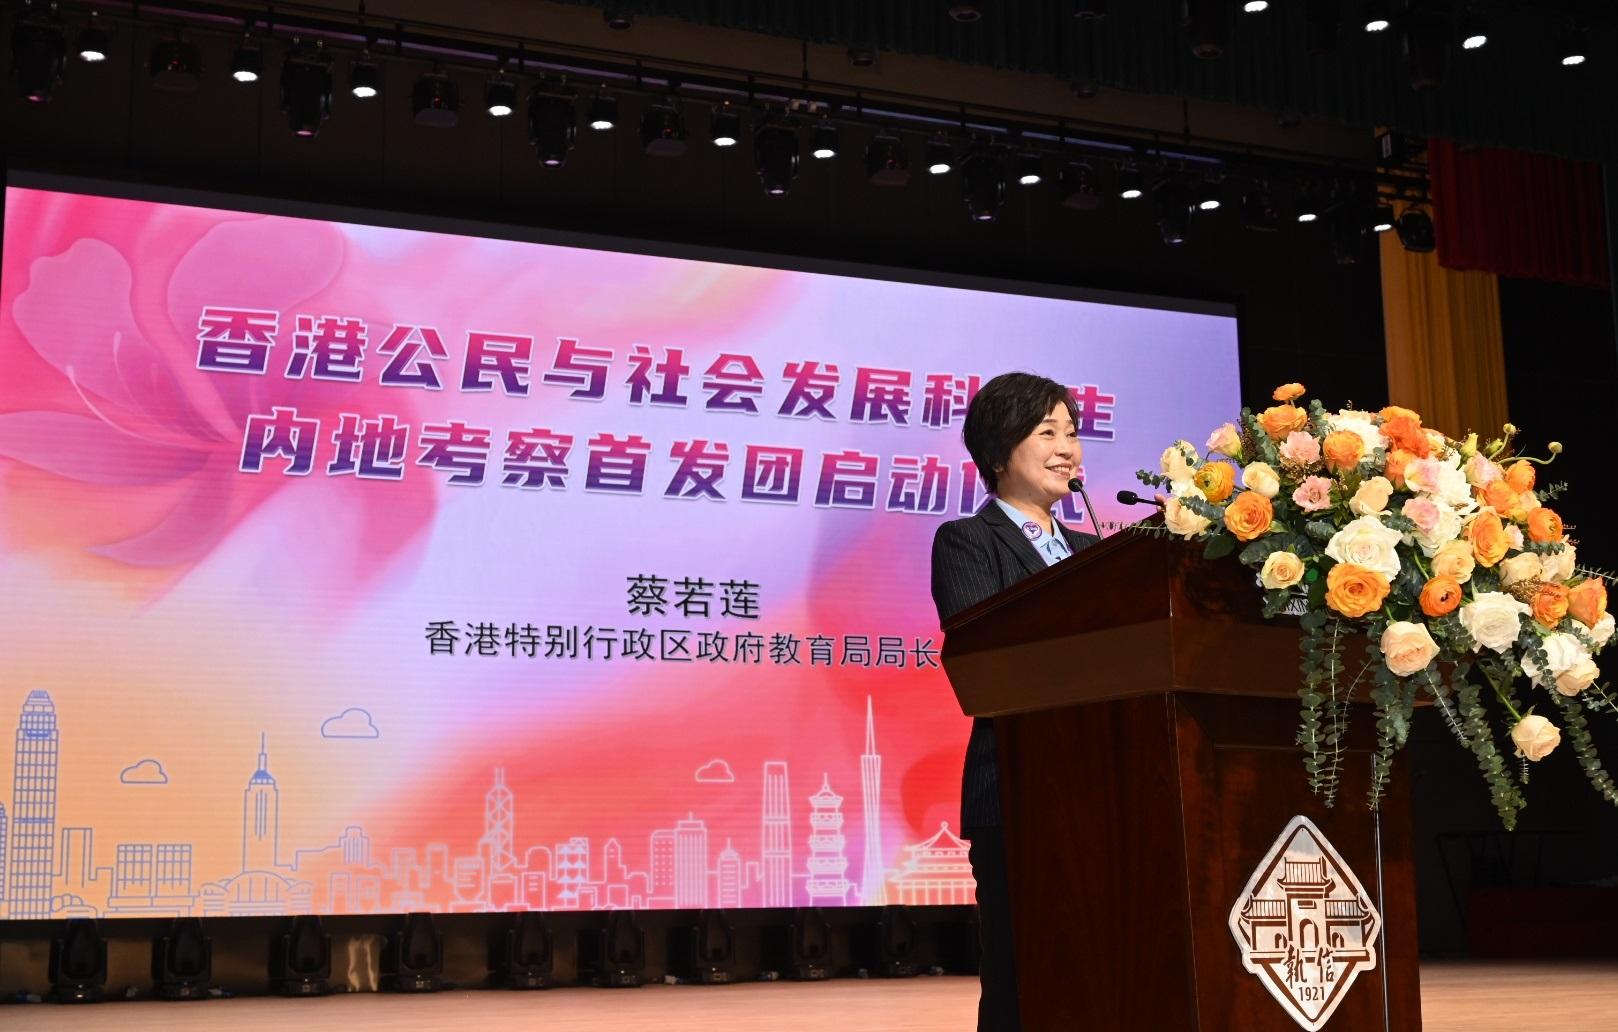 The Secretary for Education, Dr Choi Yuk-lin, attended the kick-off ceremony of the first Mainland study tour of the senior secondary subject of Citizenship and Social Development at Guangzhou ZhiXin High School today (April 3). Photo shows Dr Choi speaking at the ceremony.